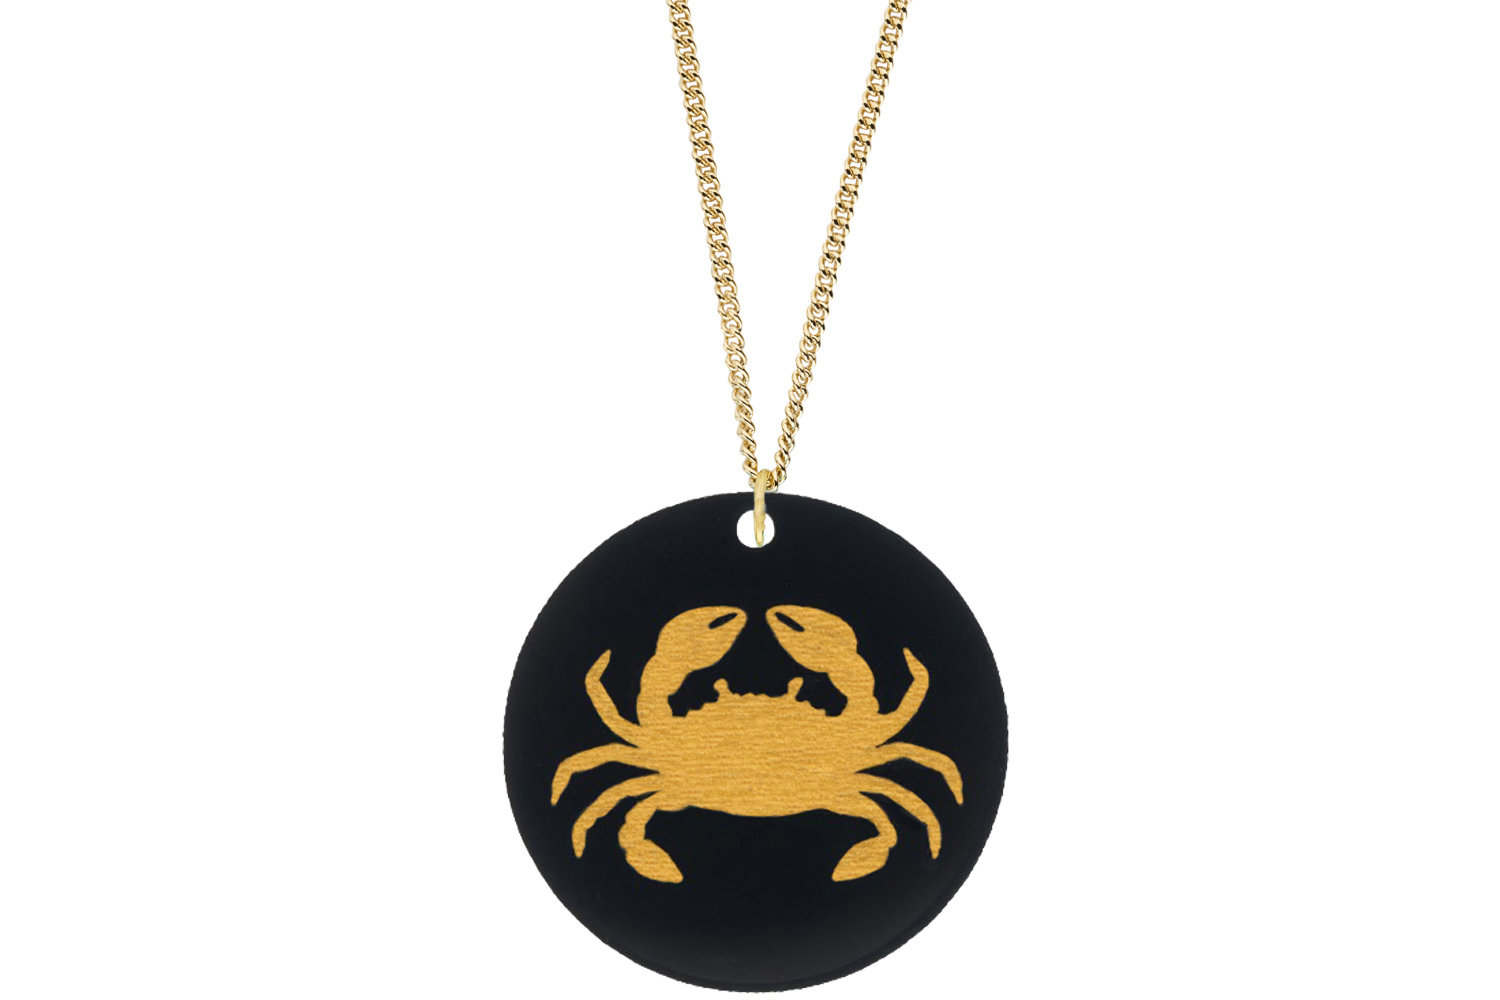 Crab Pendant Subtle Style Refined with Paint on Chain Necklace